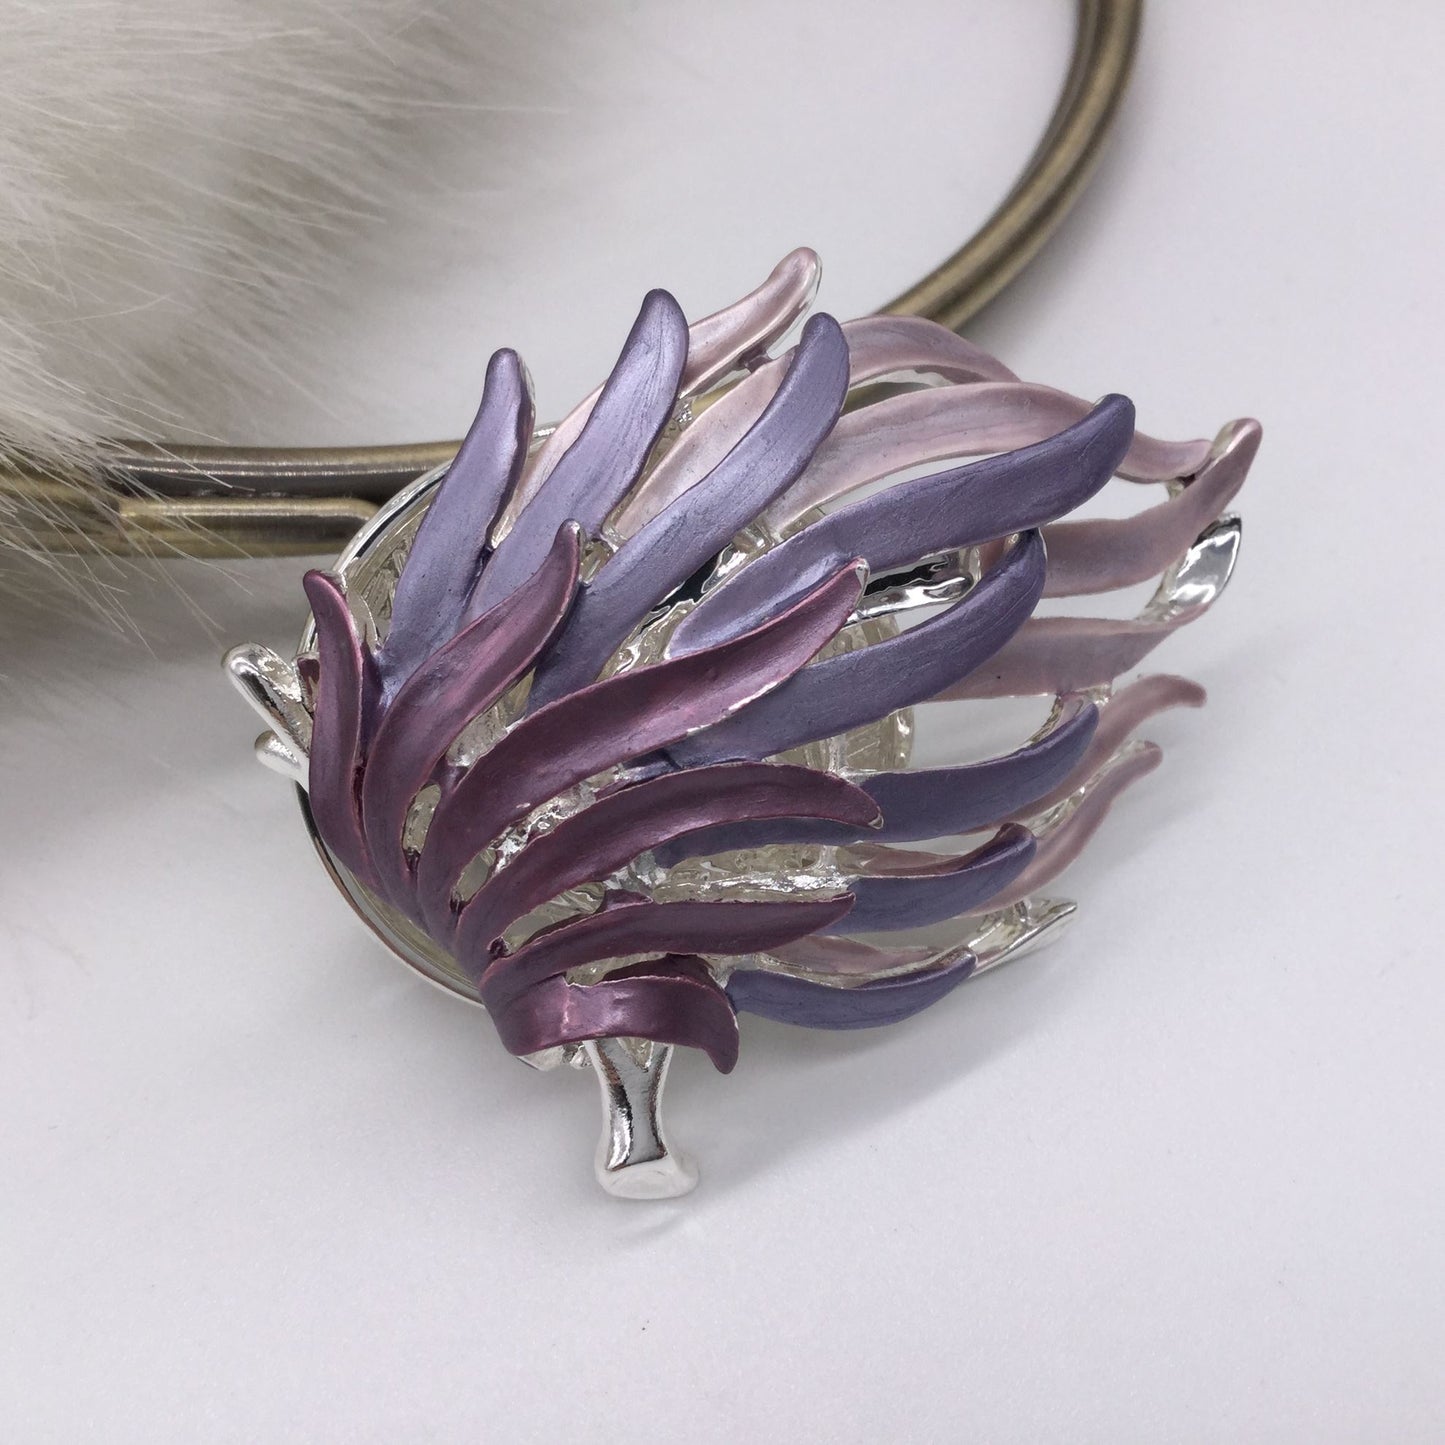 Silver torch brooch with waves of purple flames